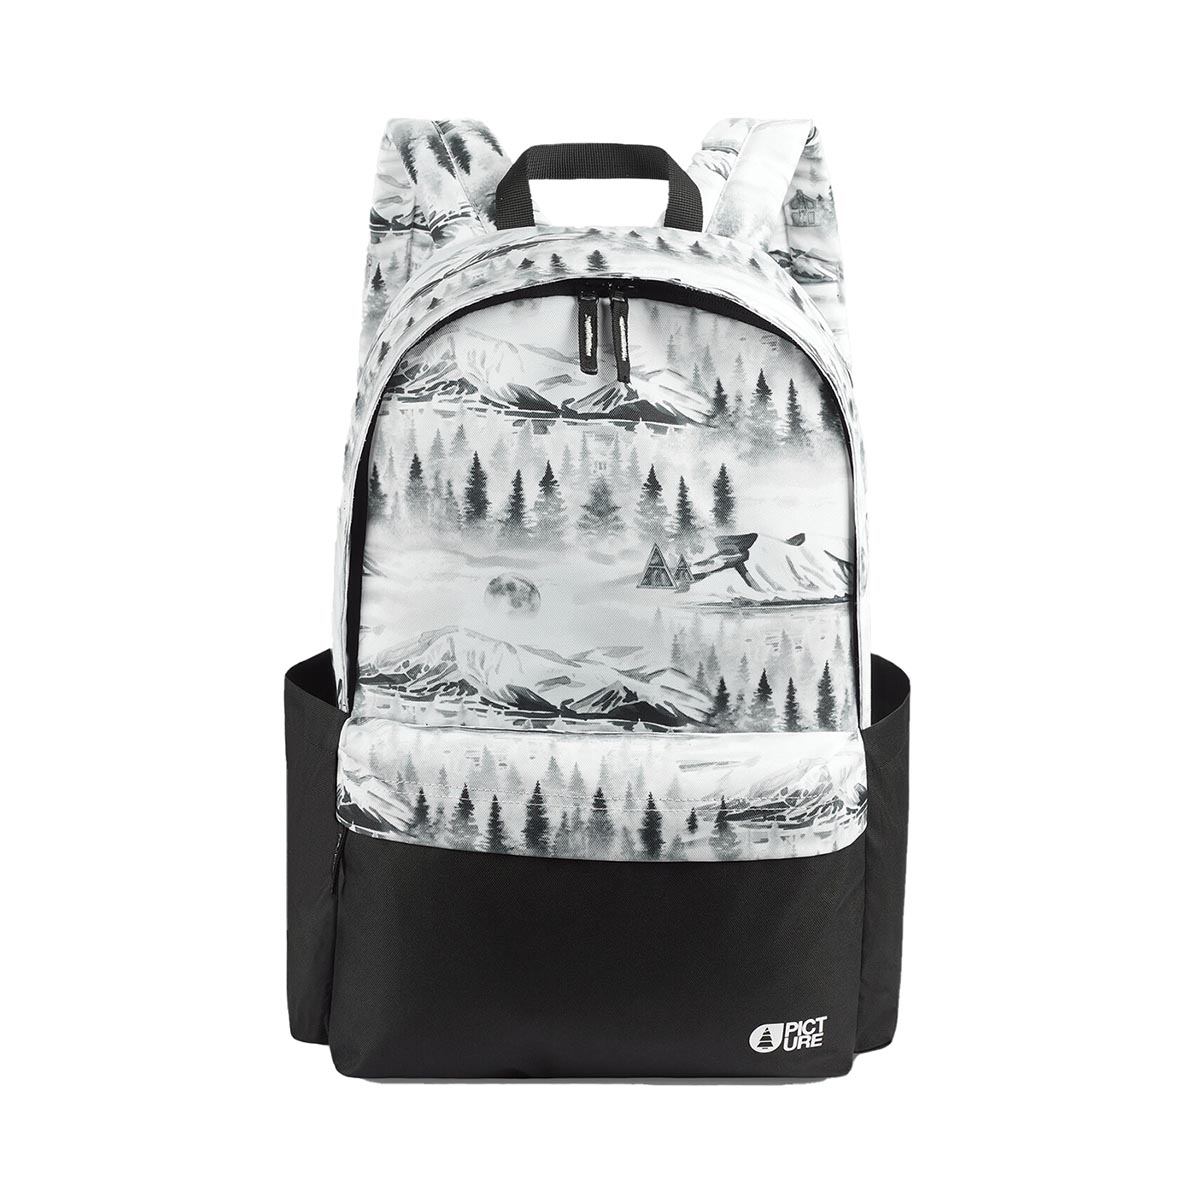 PICTURE - TAMPU BACKPACK 20 L